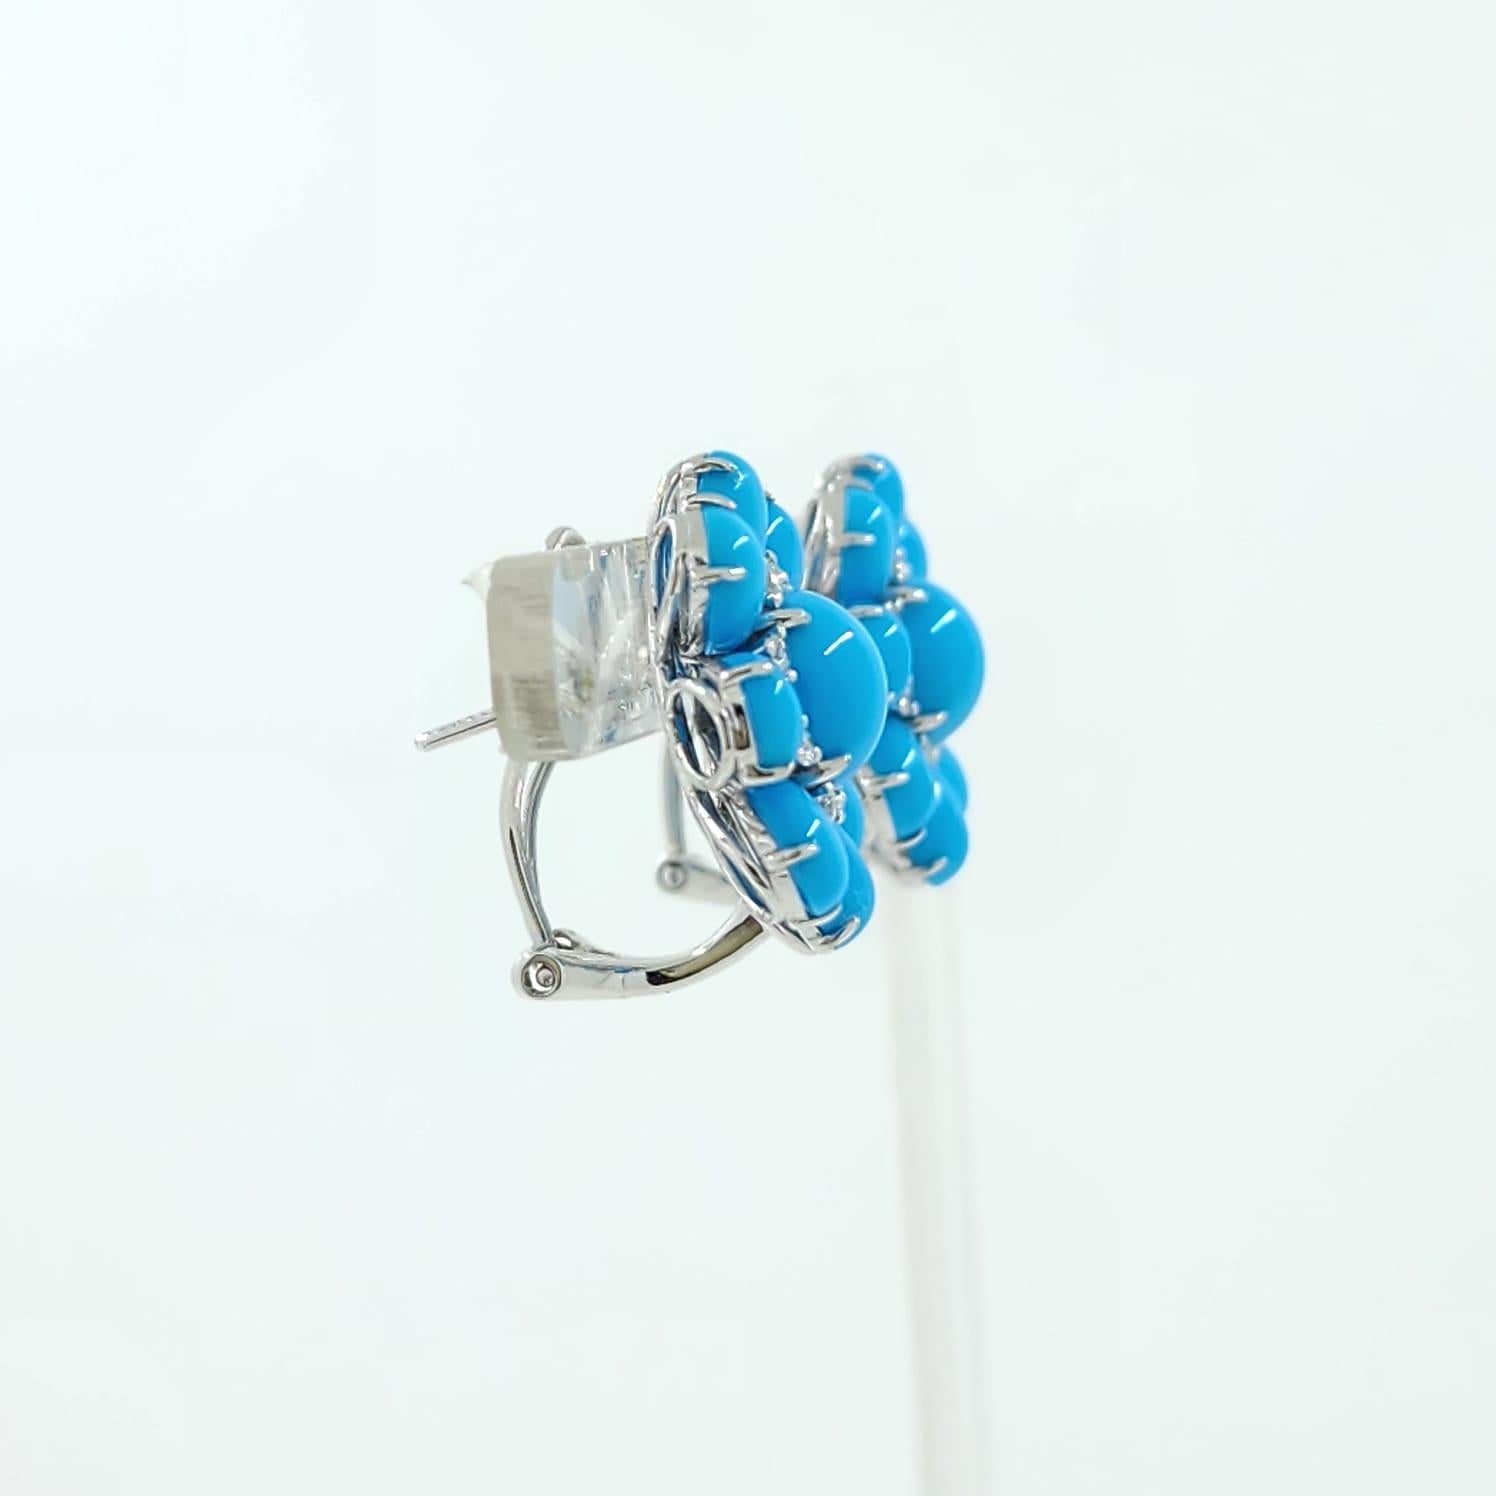 Contemporary Vintage Turquoise Diamond Earrings in 14 Karat White Gold For Sale